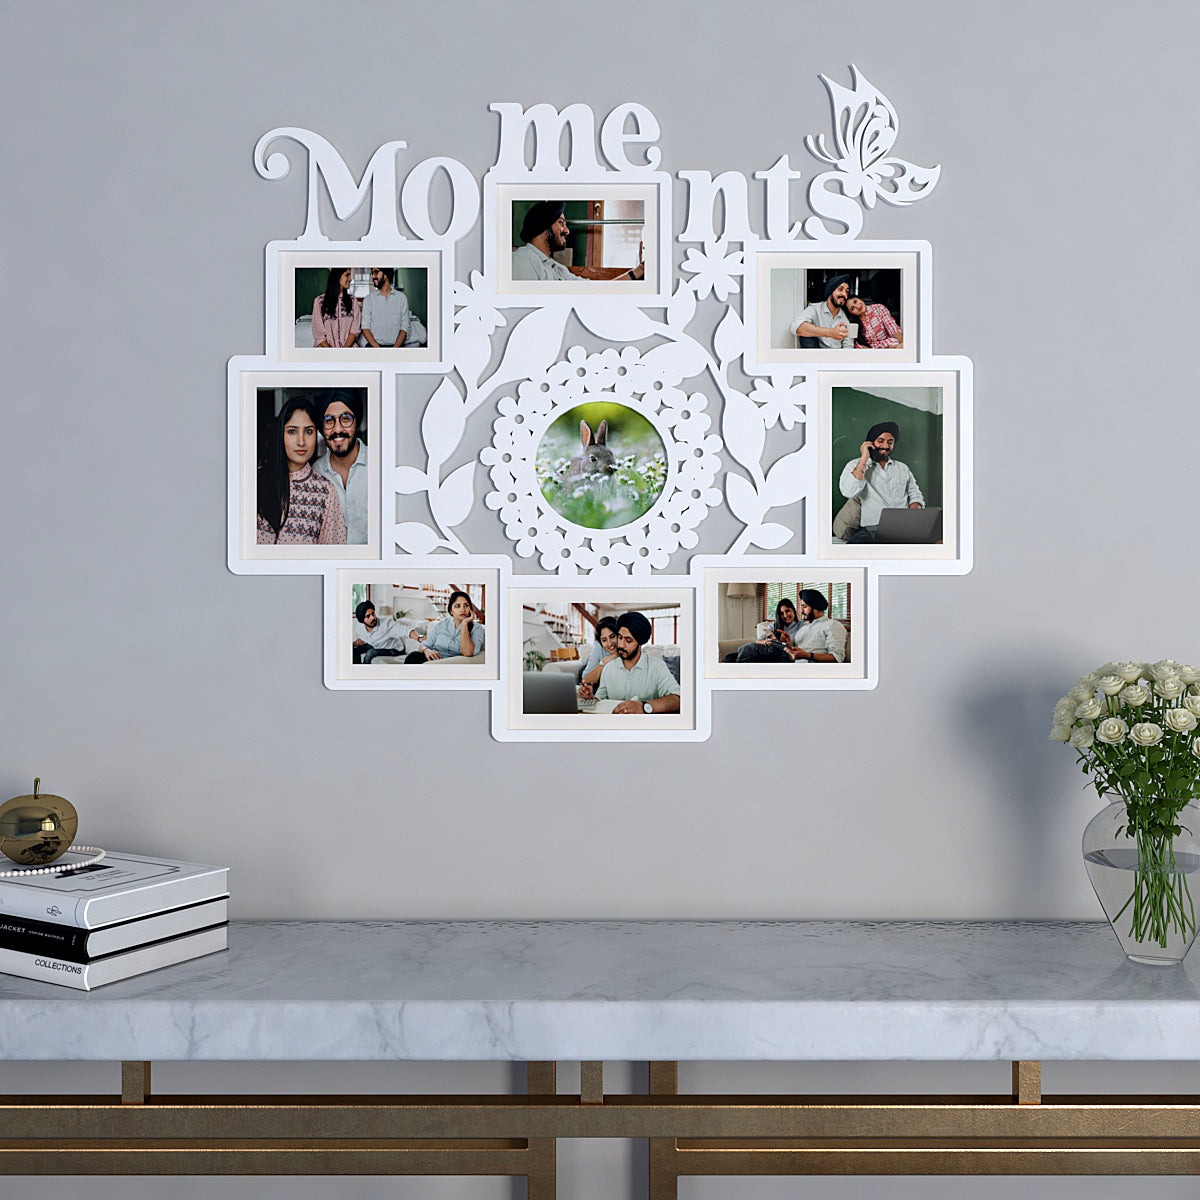 Moments White Hanging Photo Frame